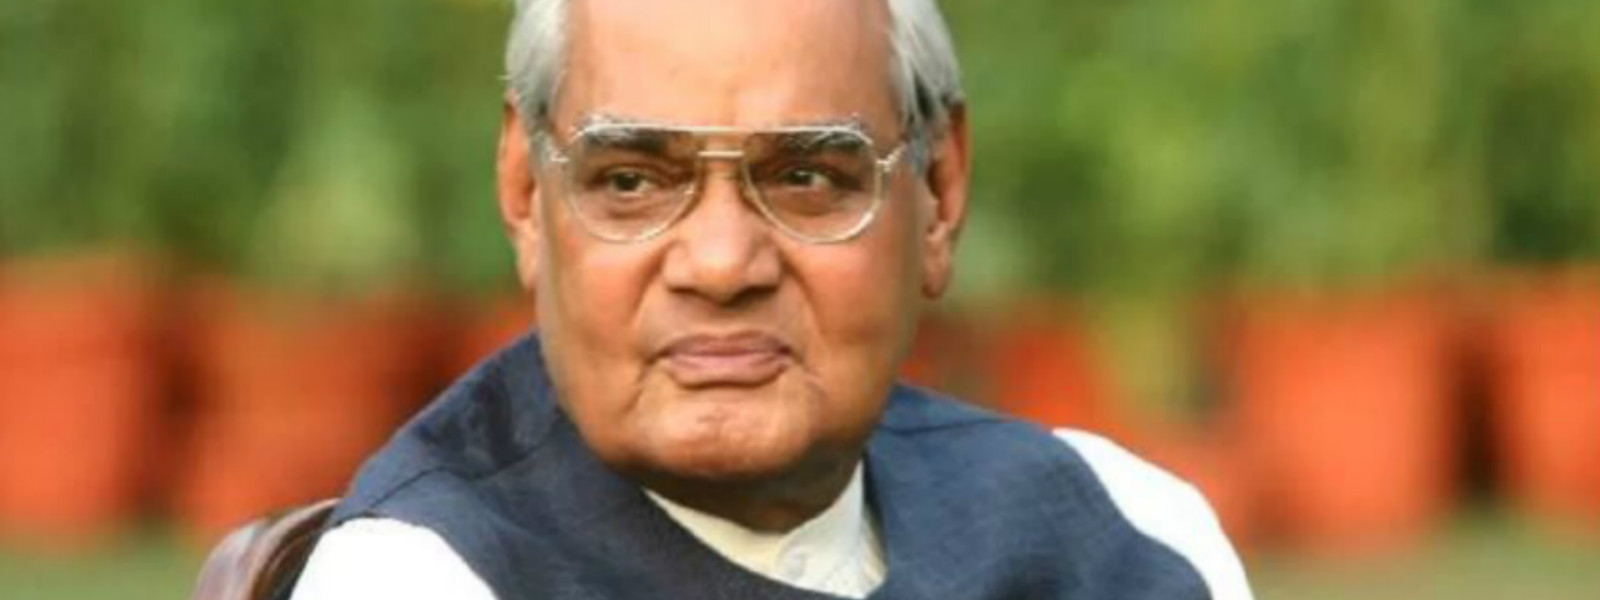 Former Indian PM Vajpayee passed away at 93